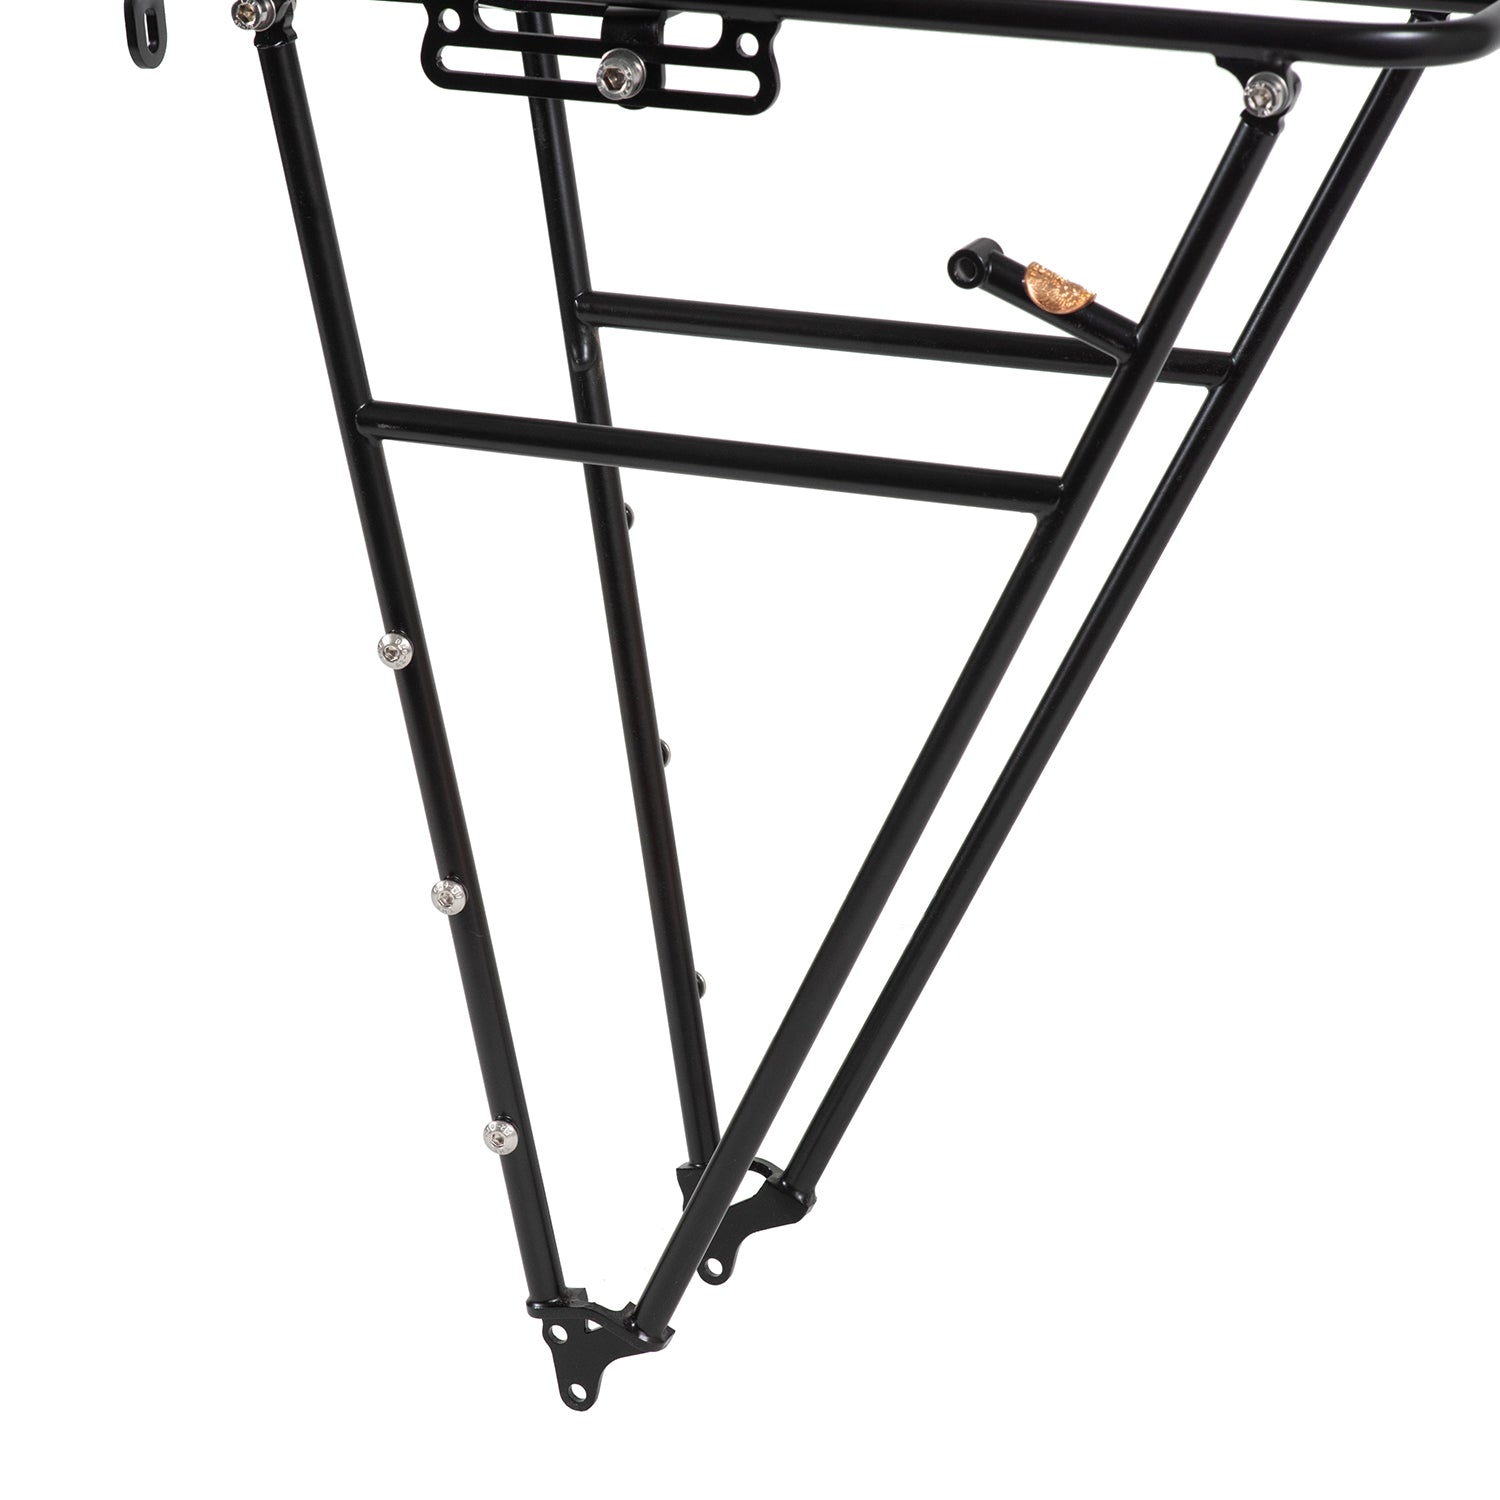 PASS AND STOW 3 Rail Rack (Cargo Cage)